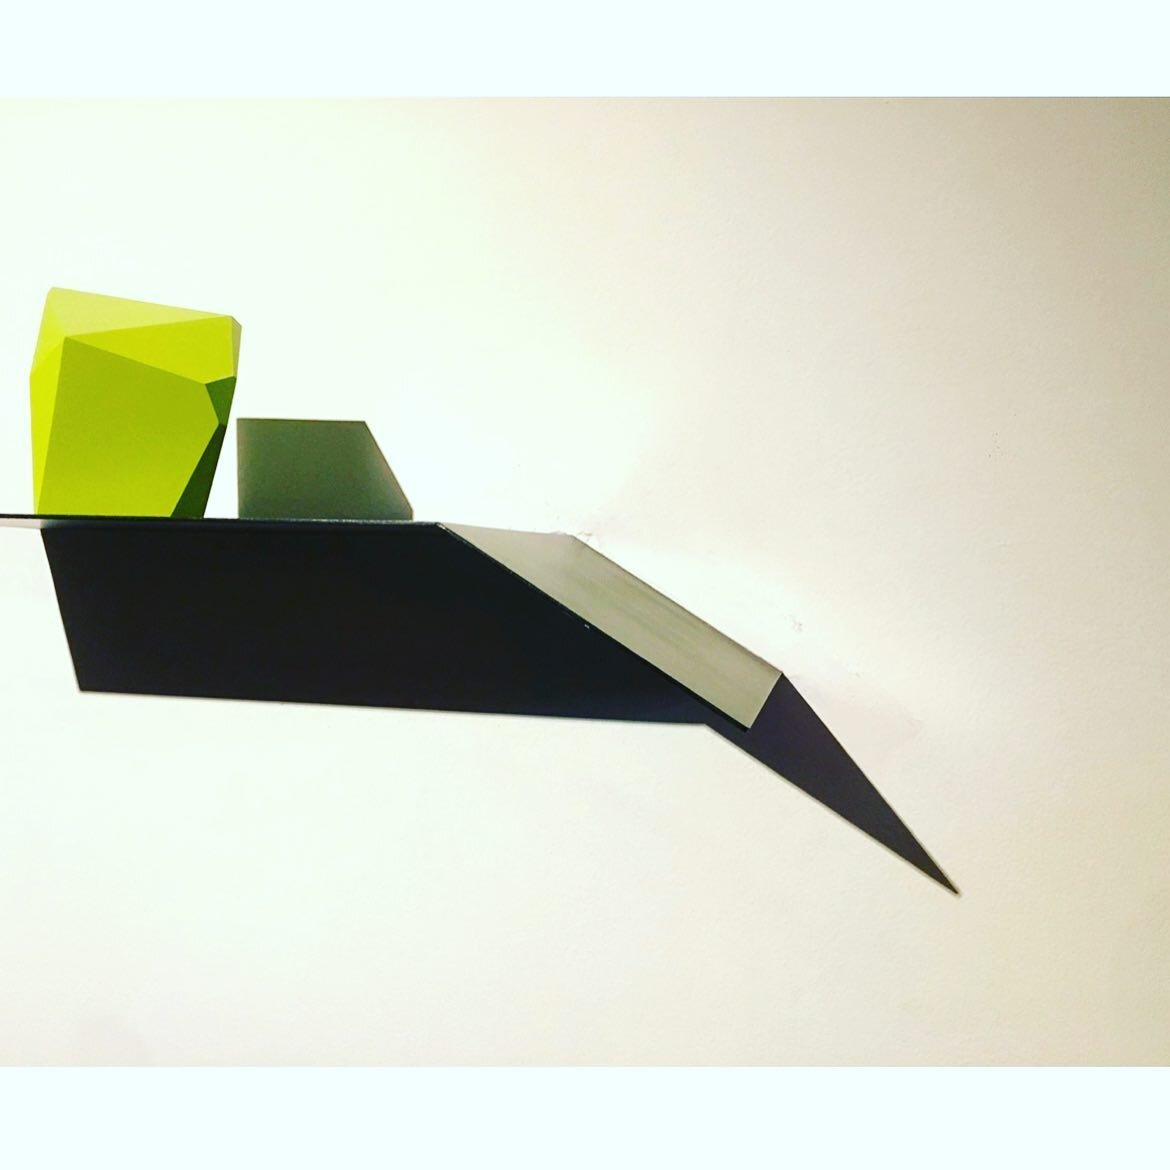 Shadow is just as important as light in the lighting design of any sculpture, space and material.
Shadow helps to articulate geometry, void, mass and texture.
This wonderful little sculpture by @peterwatson_creations,sitting on a shelf I designed, ce